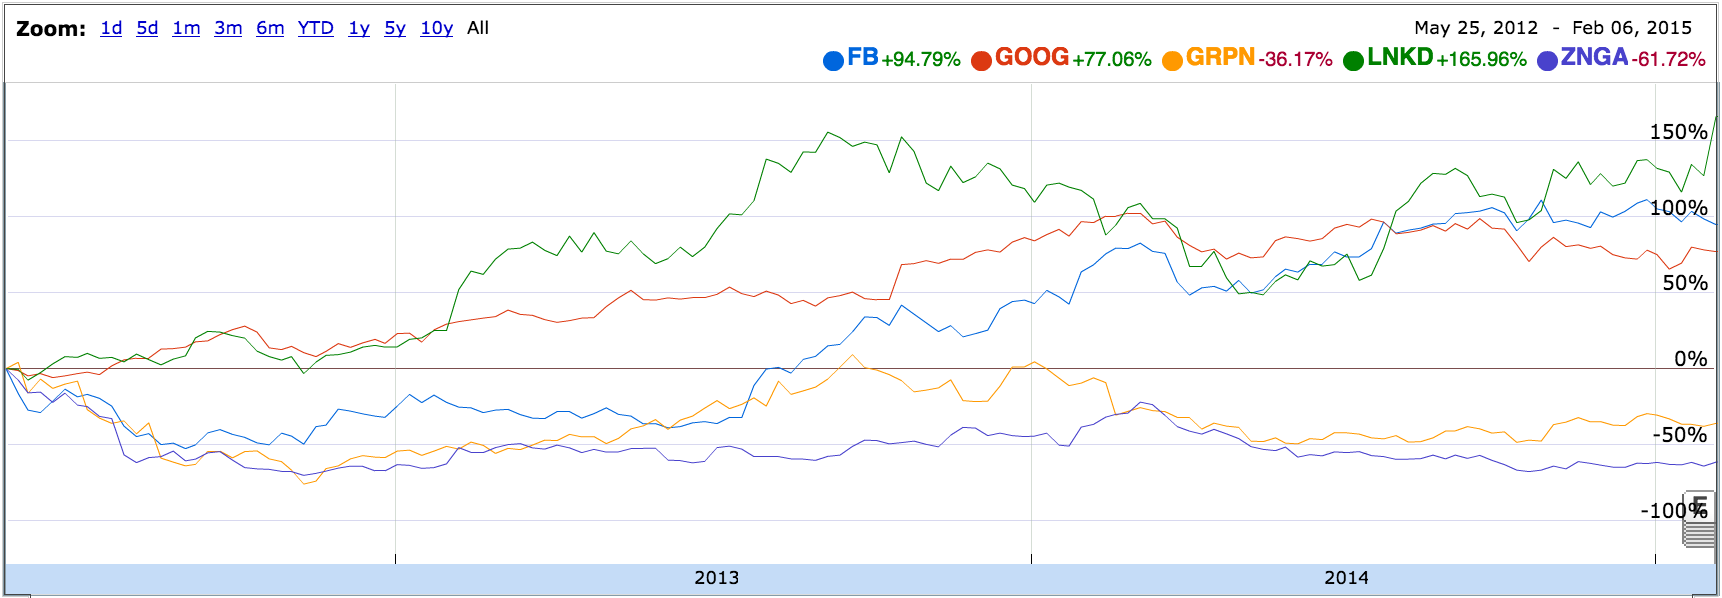 Change in share price since Facebook IPO of some major internet stocks